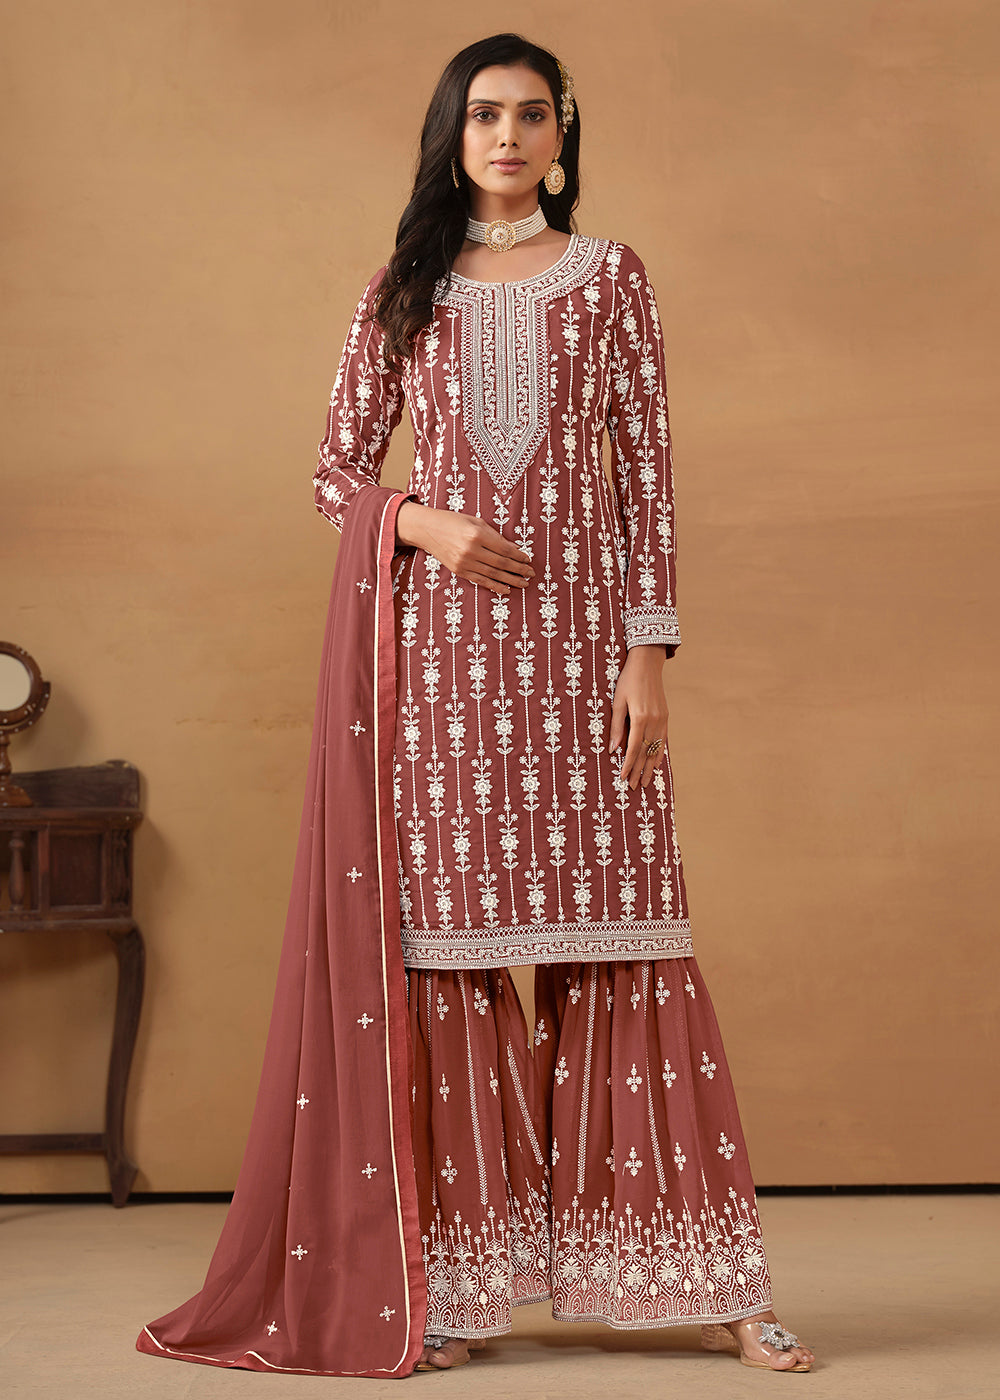 Shop Now Radiant Brown Embroidered Wedding Festive Gharara Suit Online at Empress Clothing in USA, UK, Canada, Italy & Worldwide. 